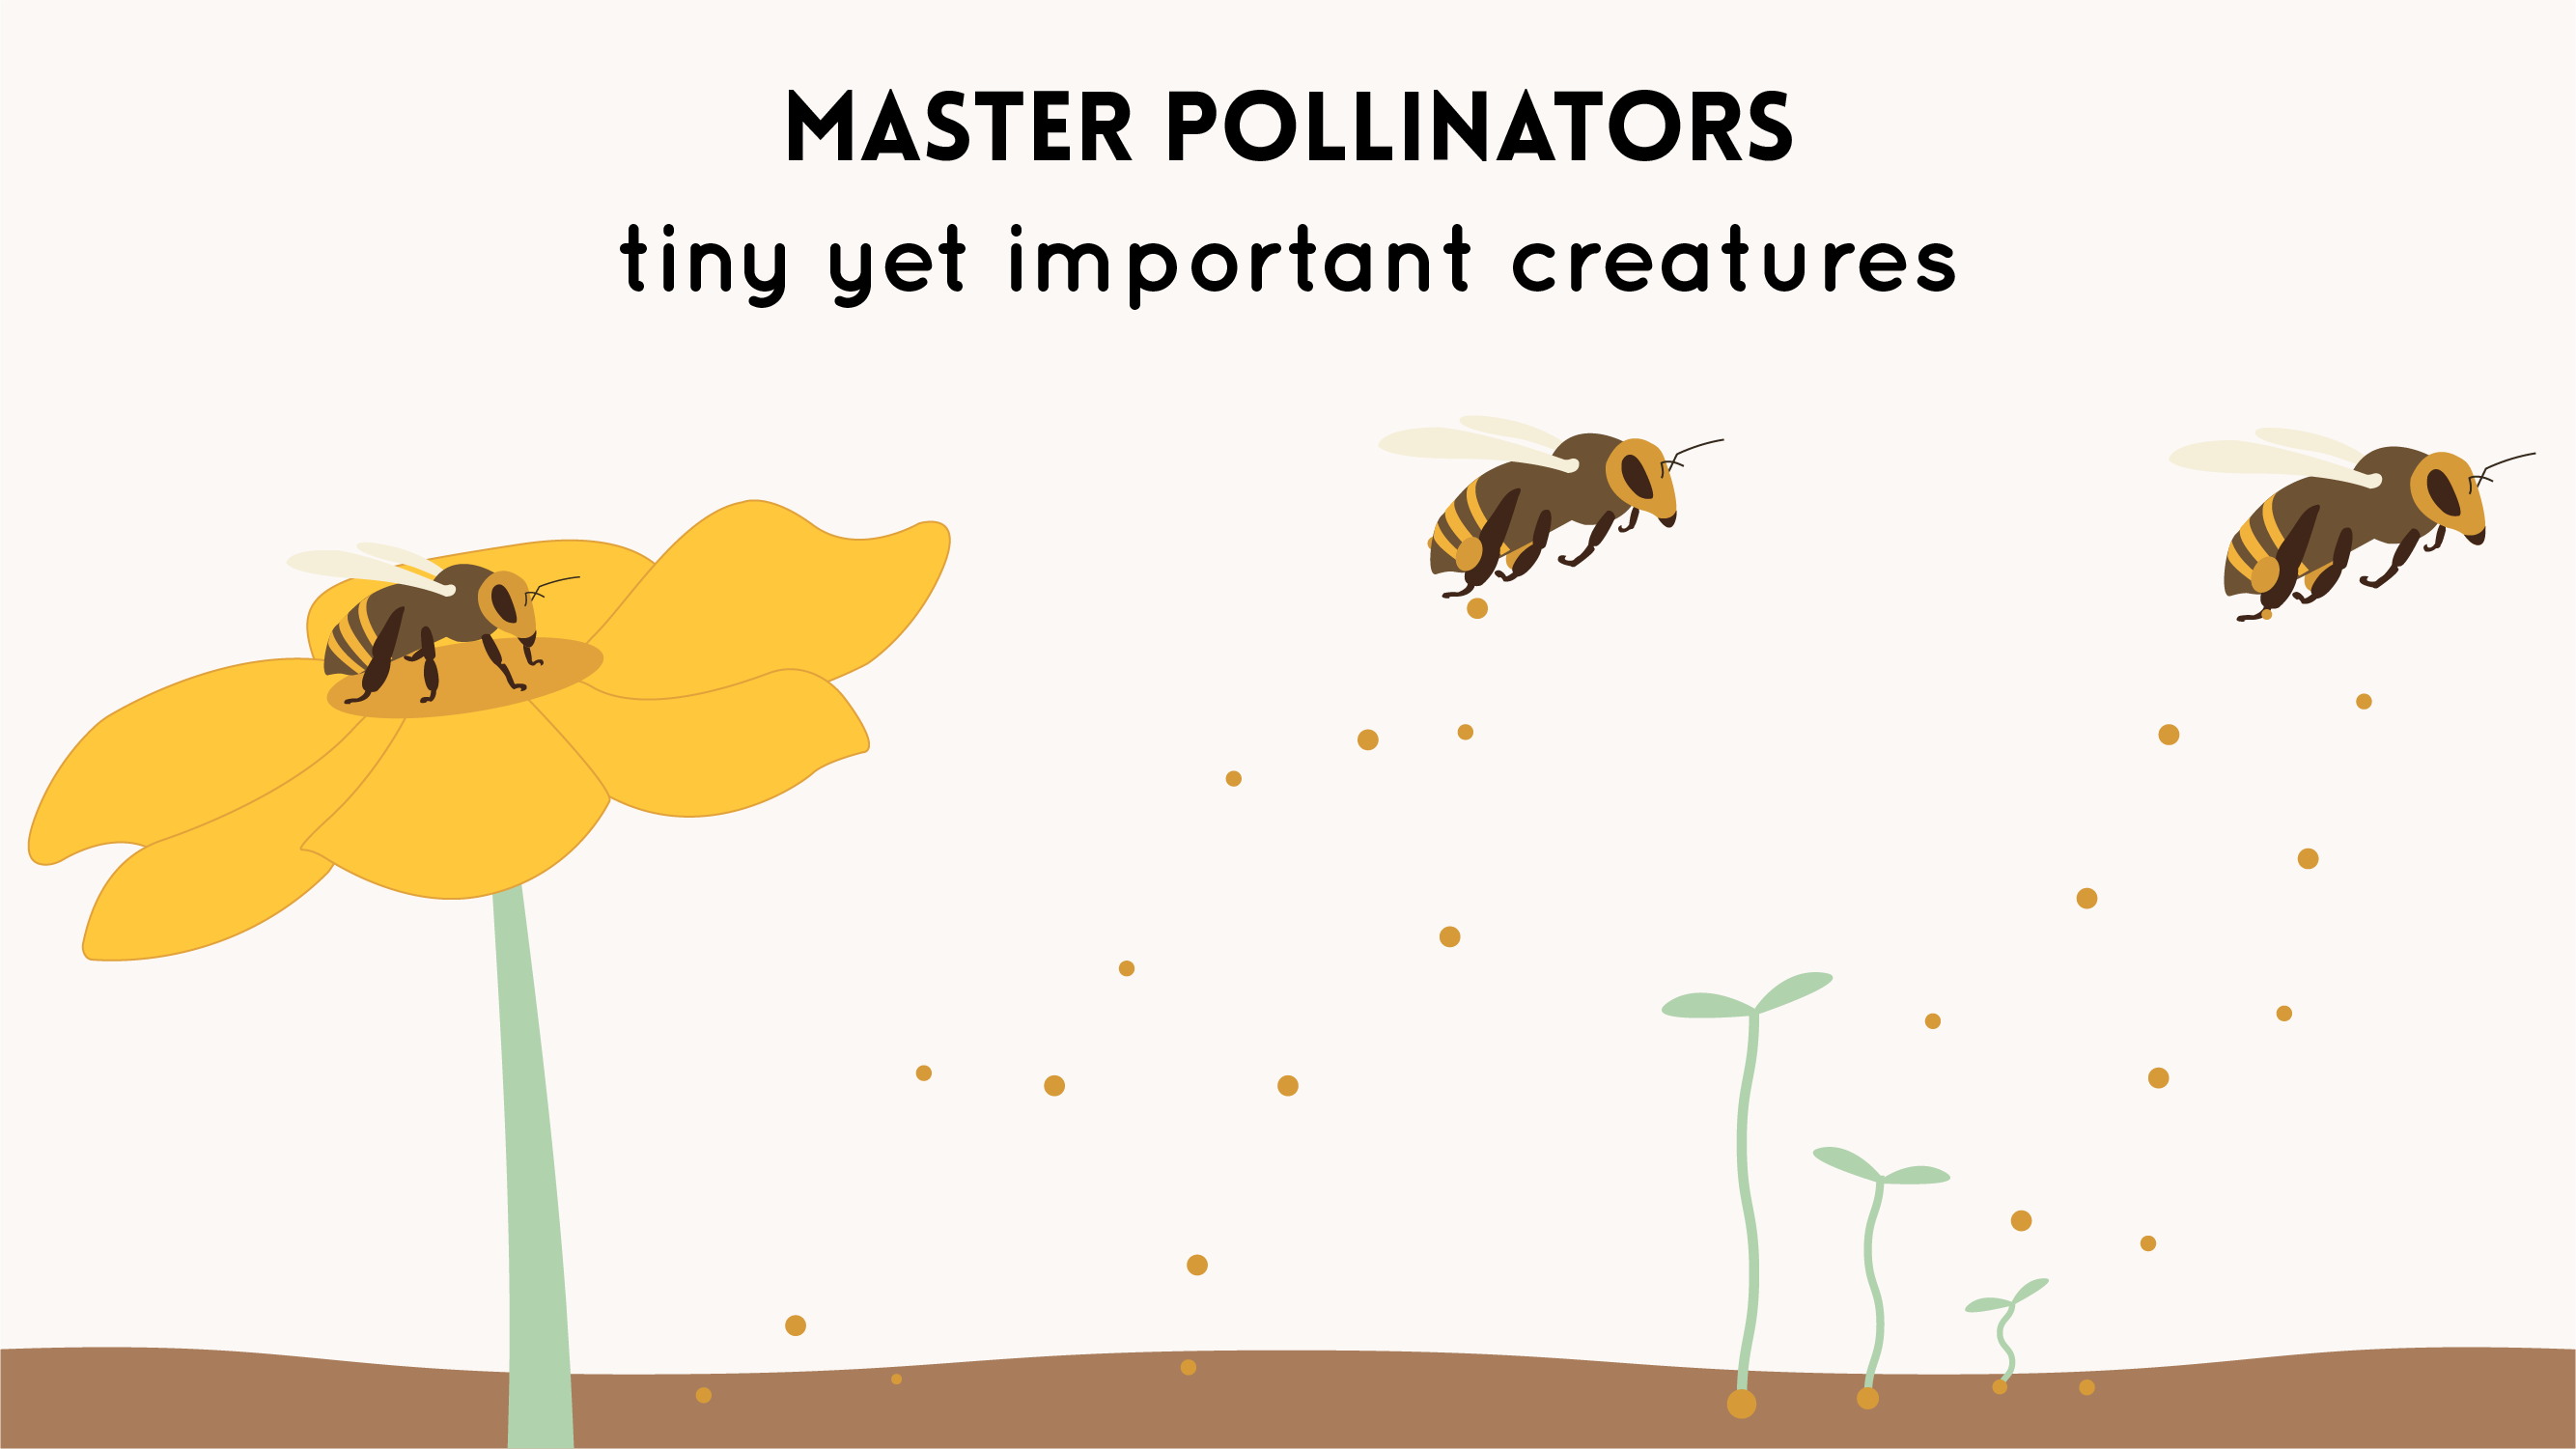 bees pollinators pollinate plants foundation of our food chain